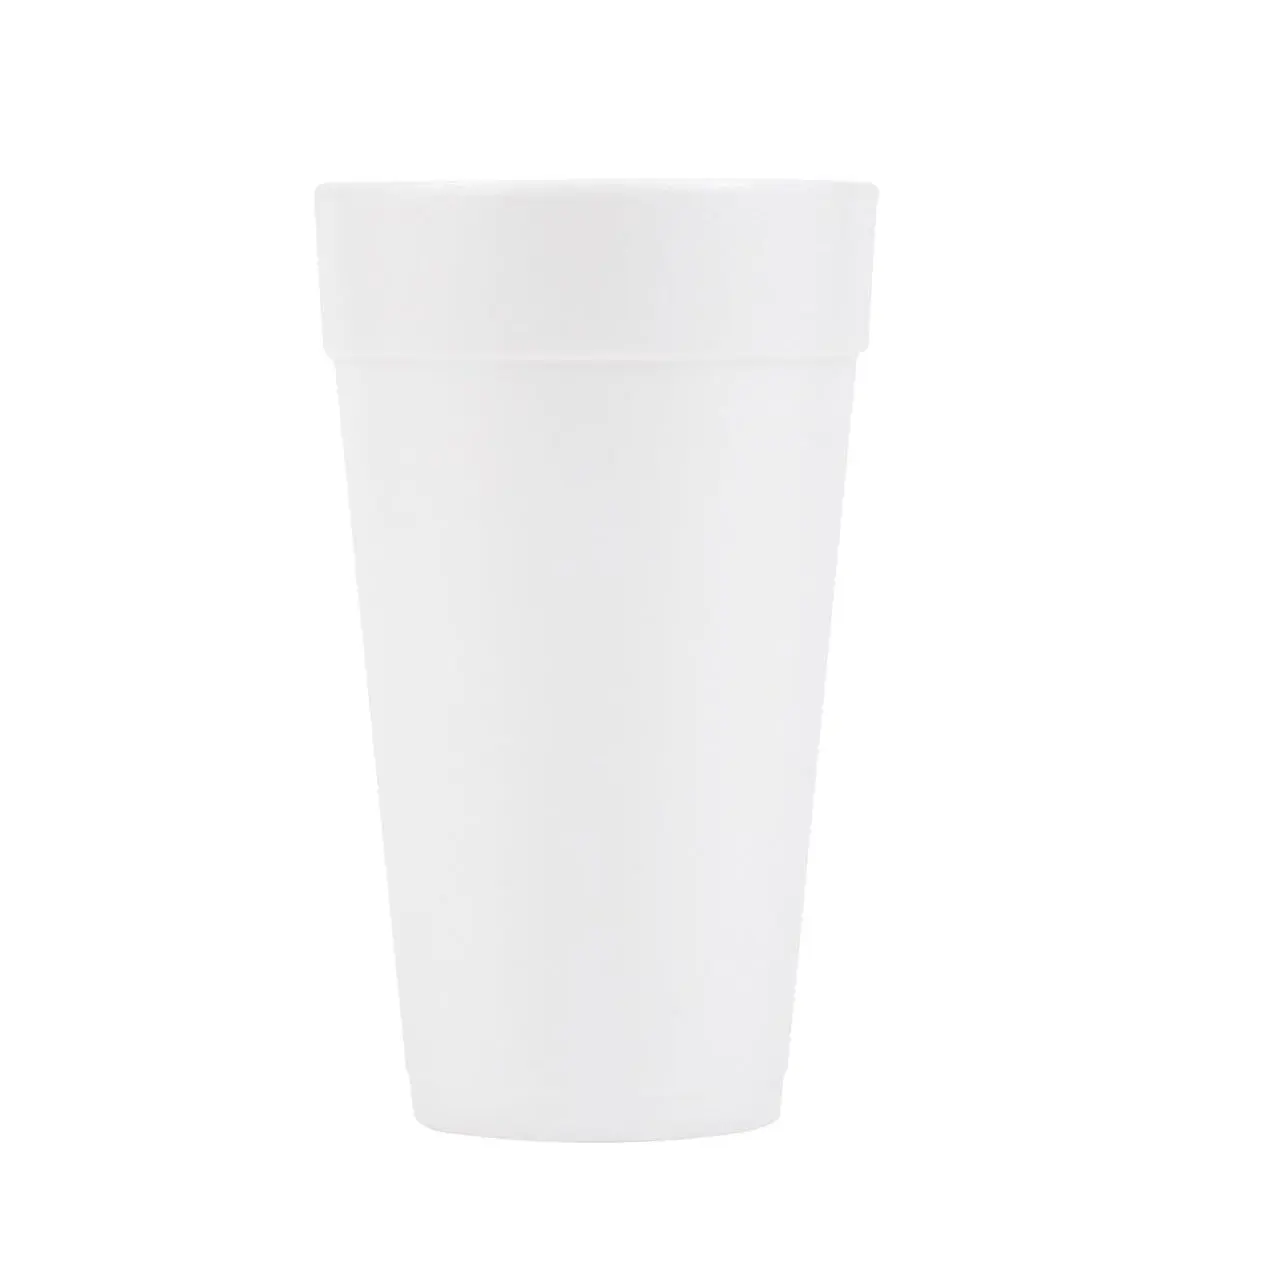 High Grade Polystyrene Disposable Foam Cups for Hot and Cold Coffee and Beverage Drinkable at Wholesale Prices